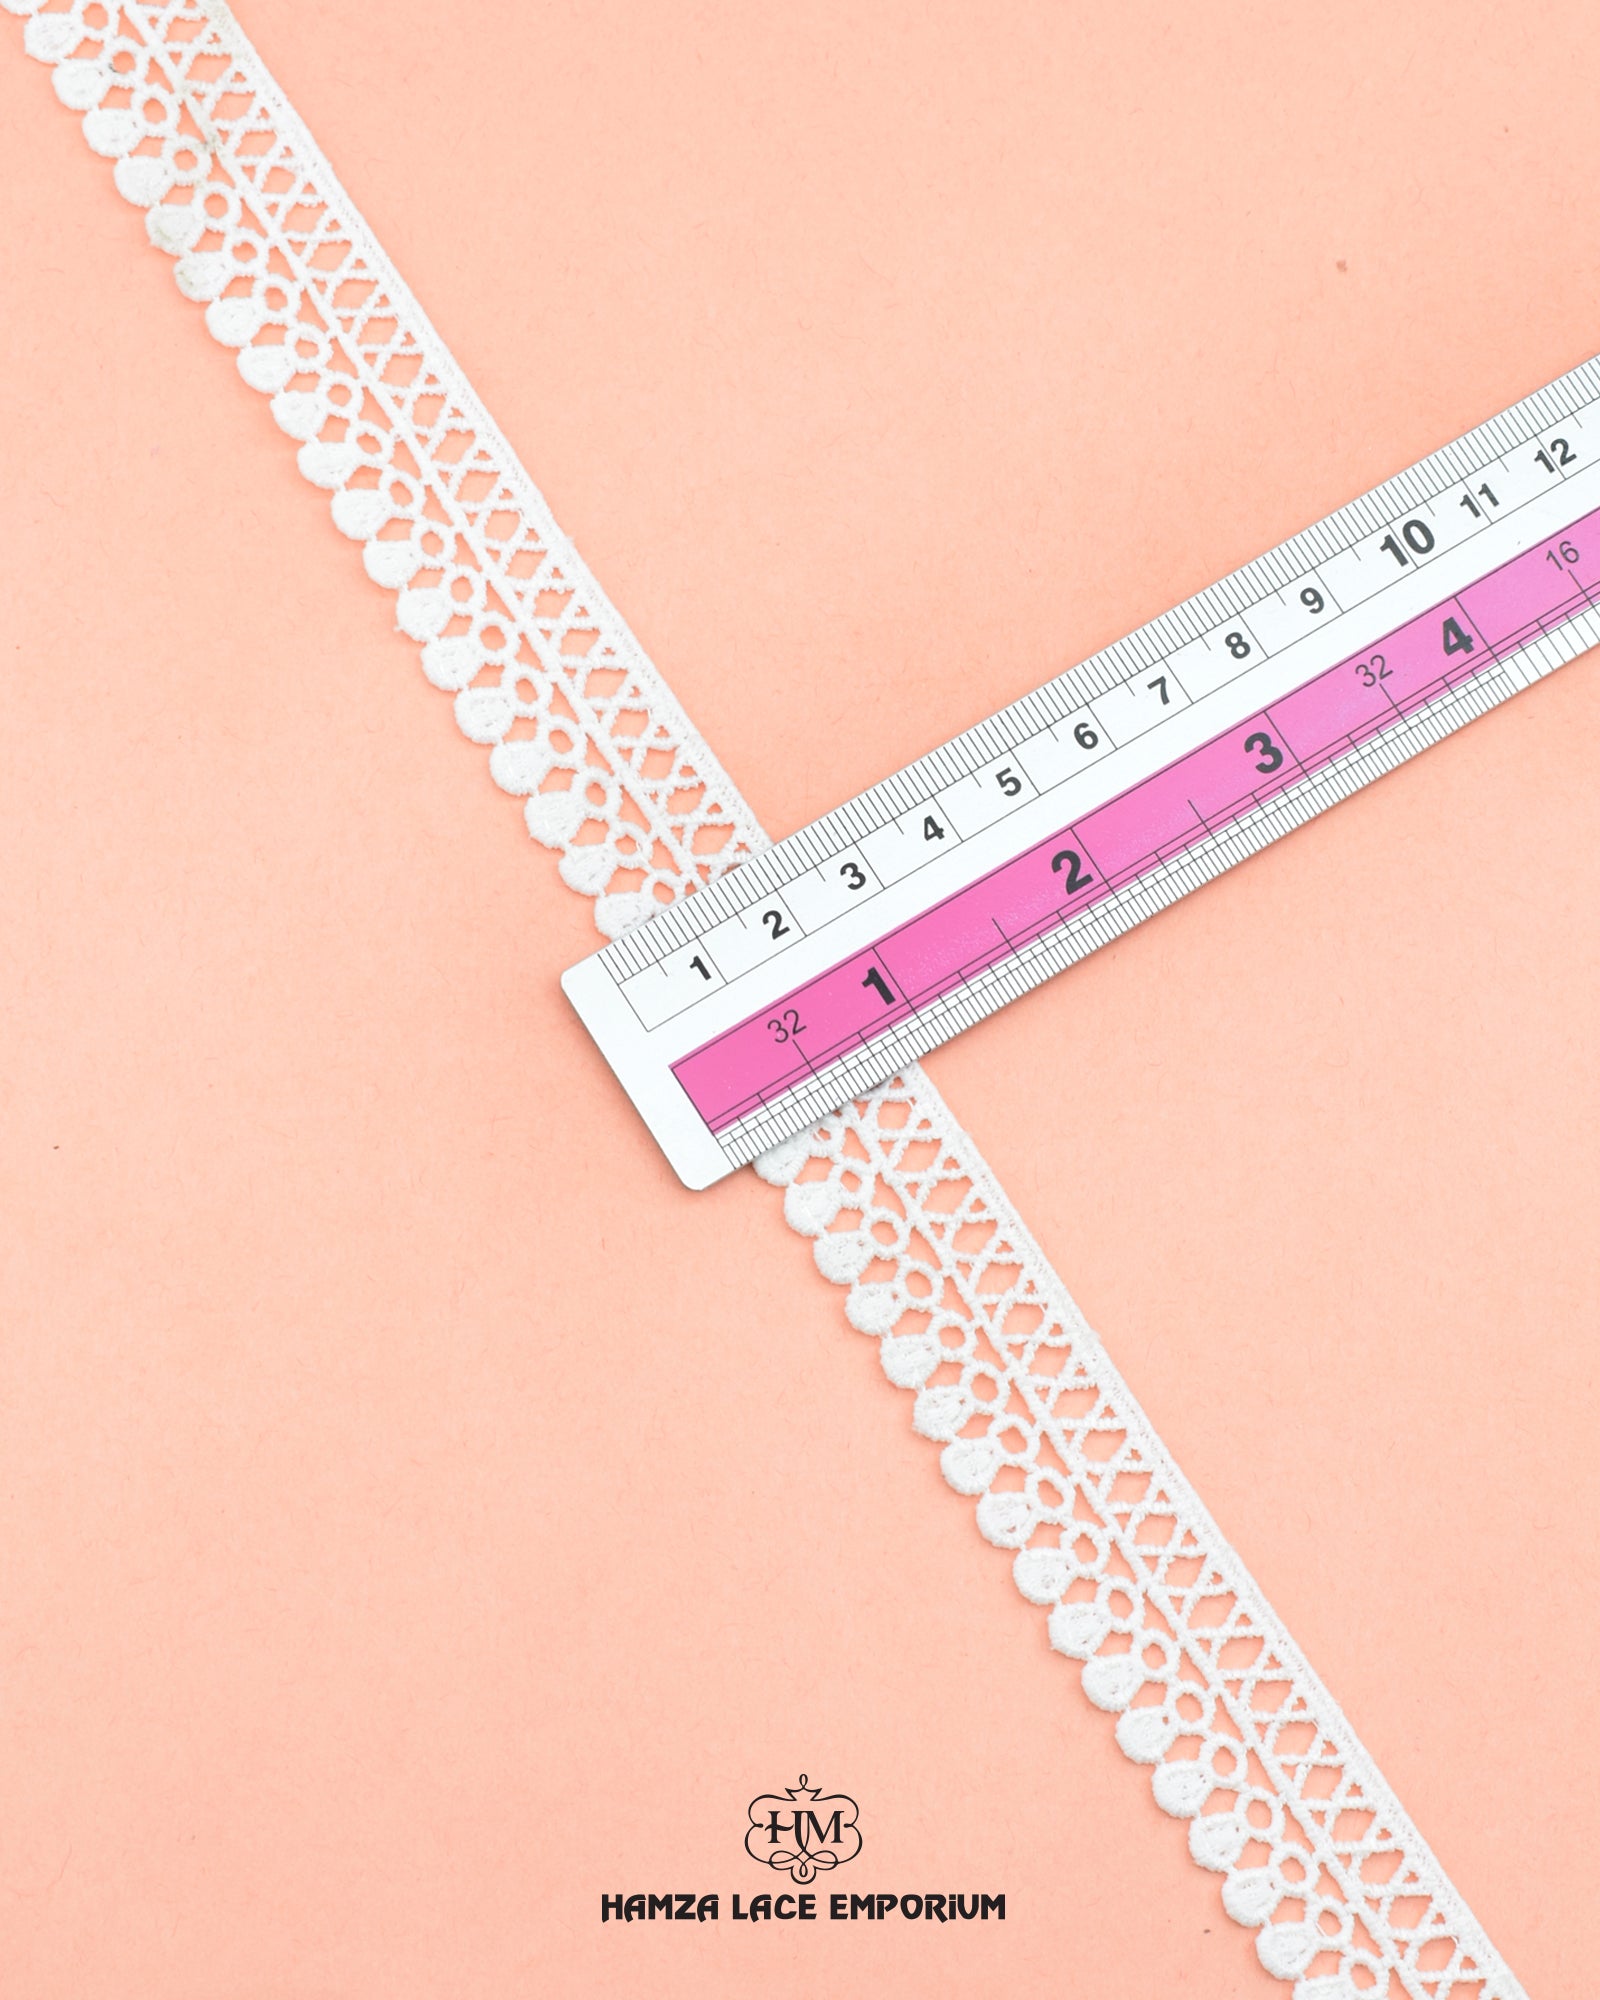 Size of the 'Edging Ball Lace 5935' is shown as '1' inch with the help of a ruler